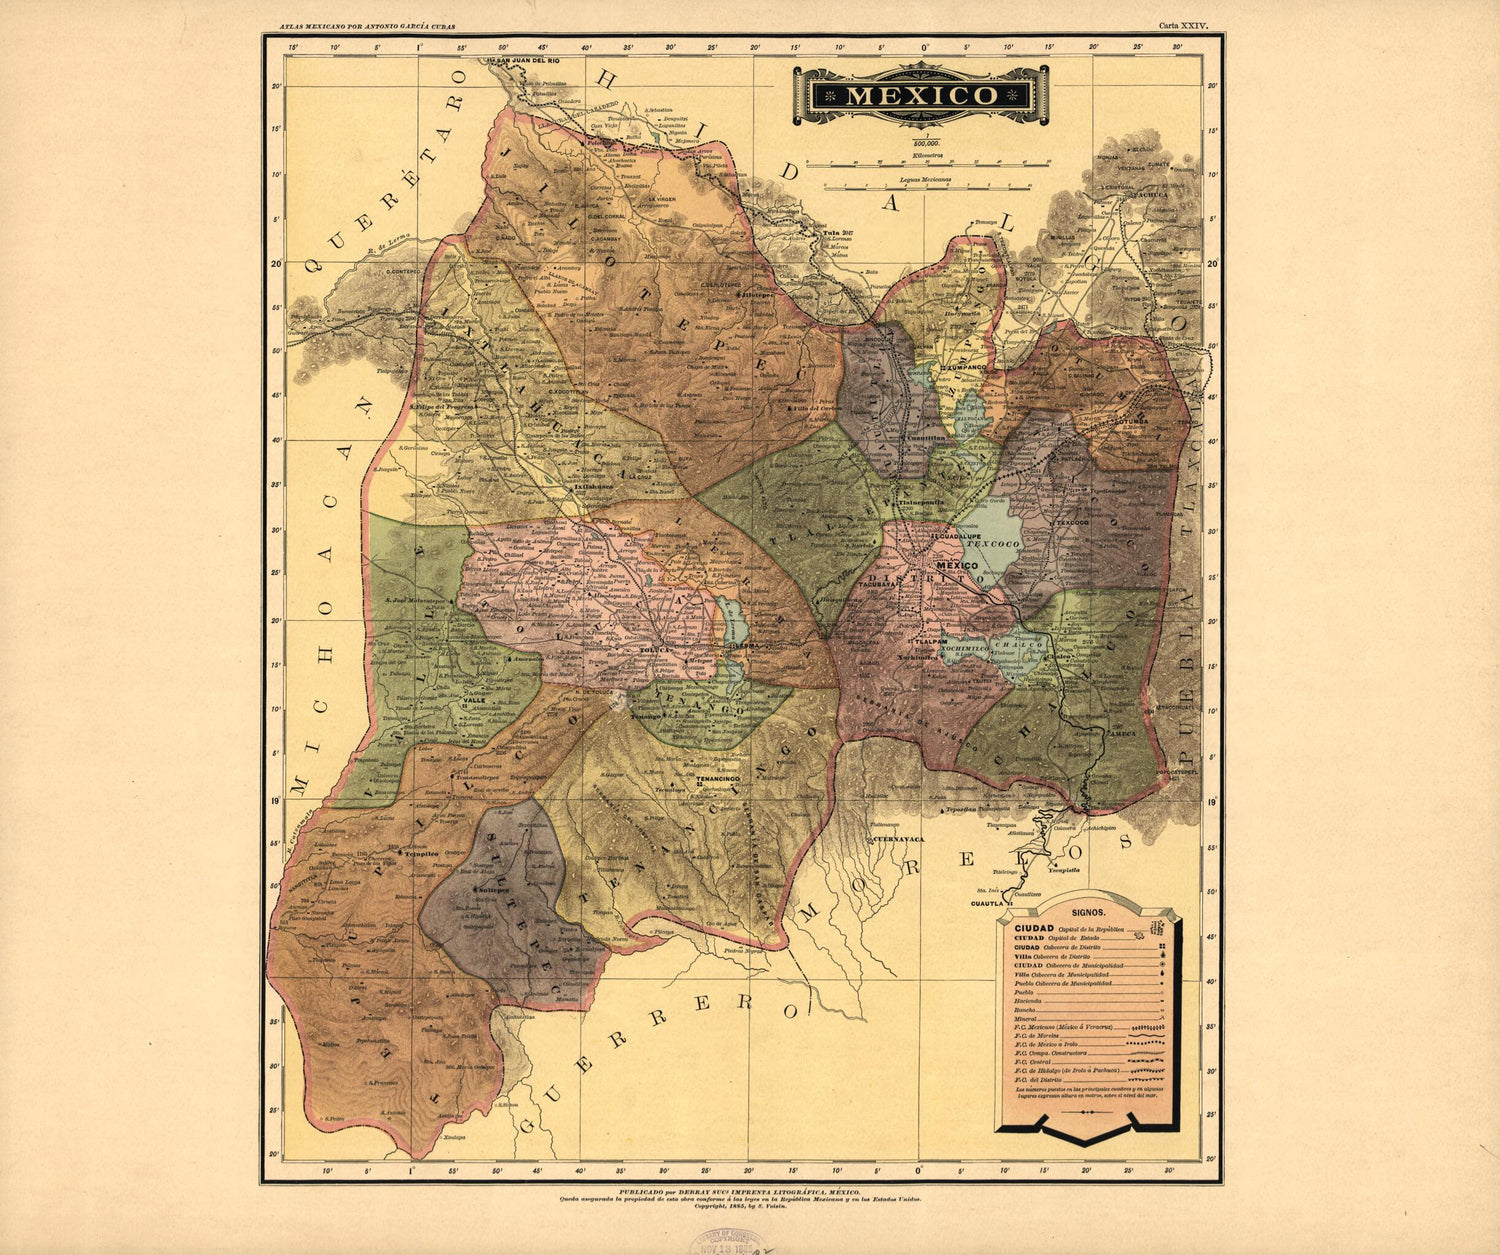 This old map of Mexico from Atlas Mexicano. from 1884 was created by Antonio García Cubas in 1884